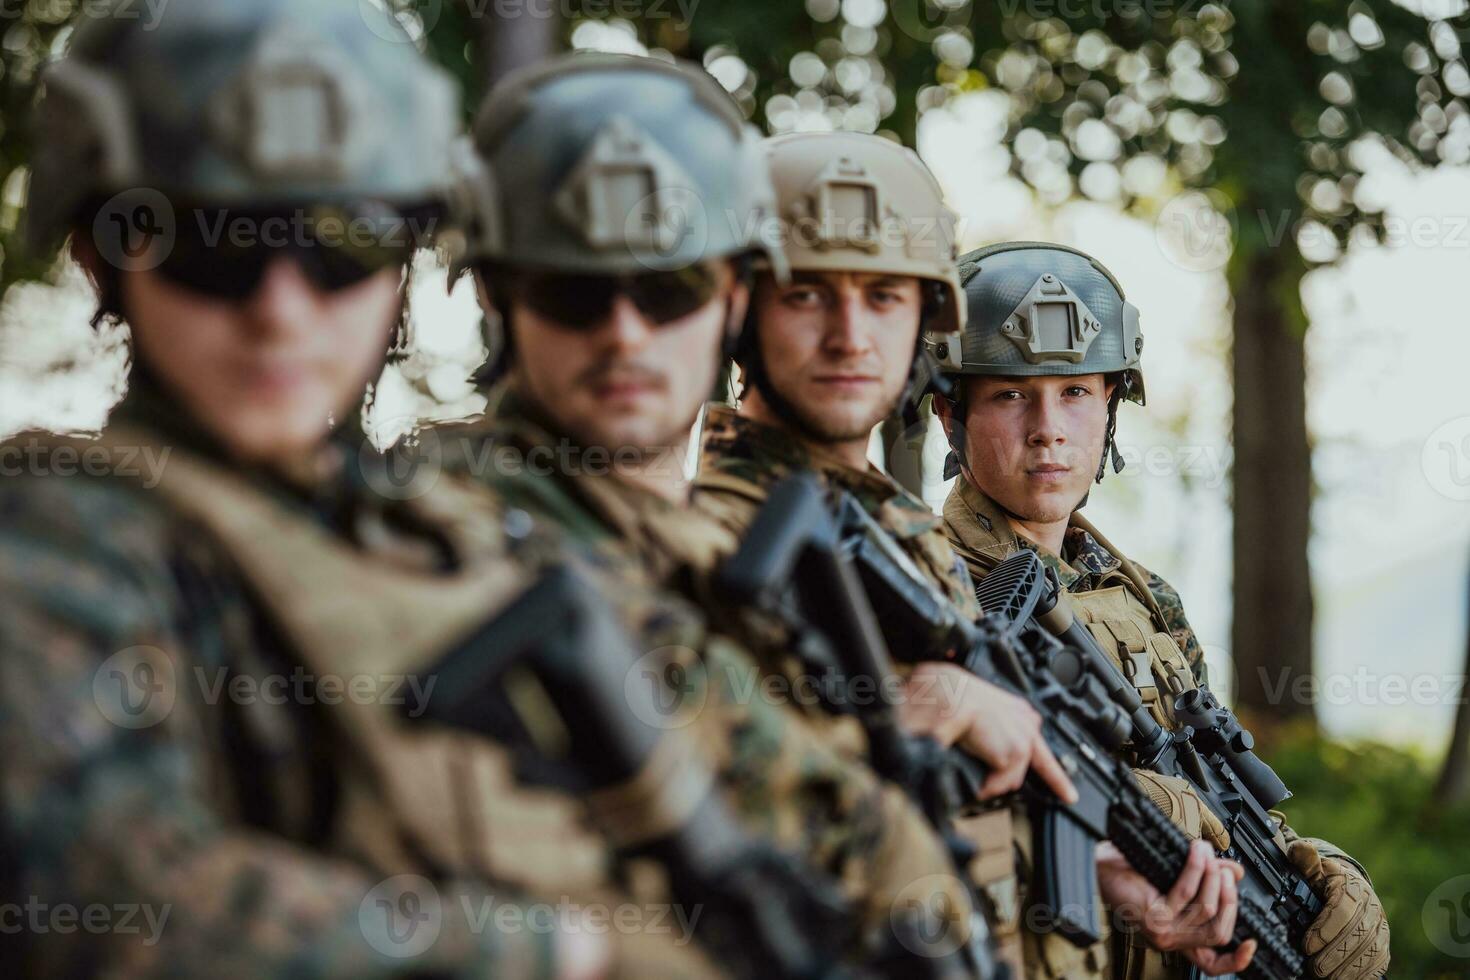 Soldier fighters standing together with guns. Group portrait of US army elite members, private military company servicemen, anti terrorist squad photo